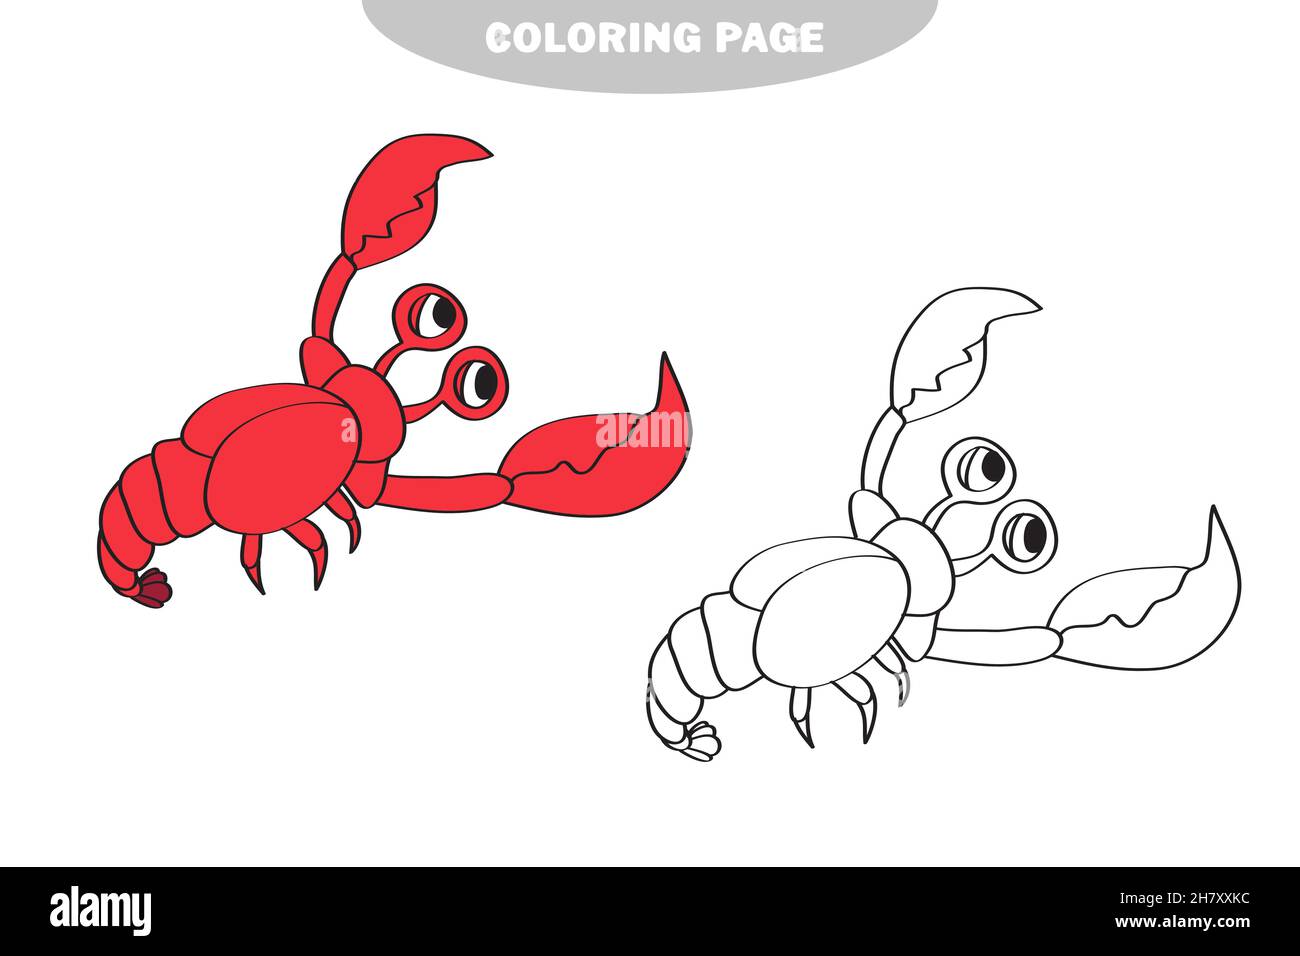 Simple coloring page vector illustration of cartoon shrimp cancer